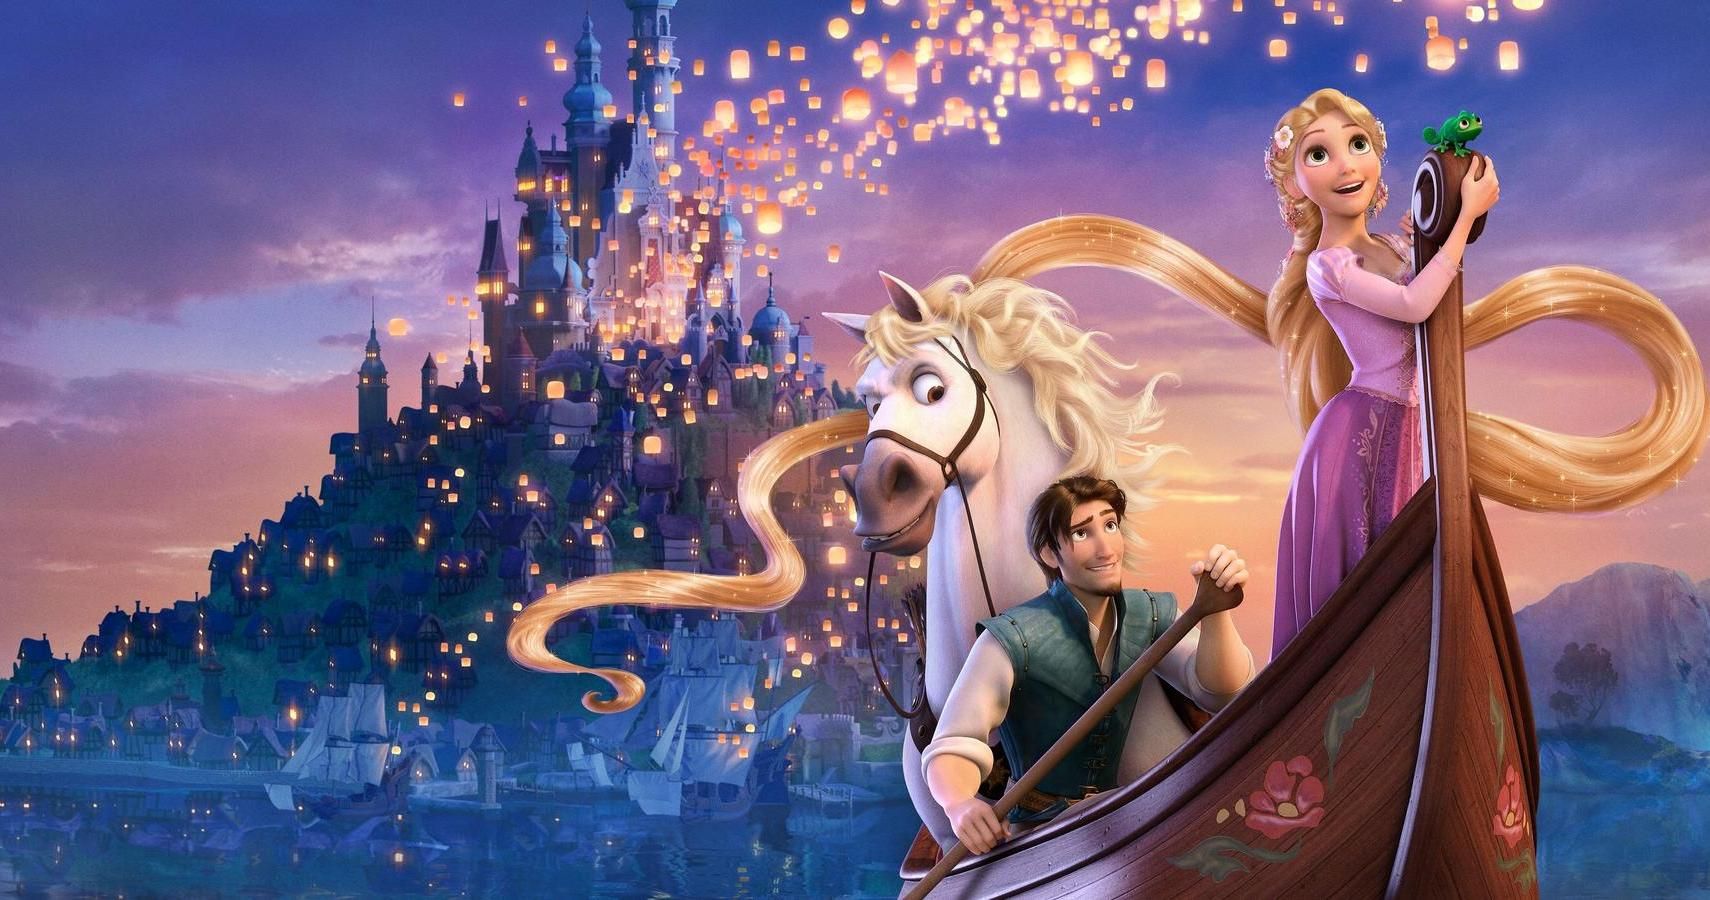 watch tangled full movie online free